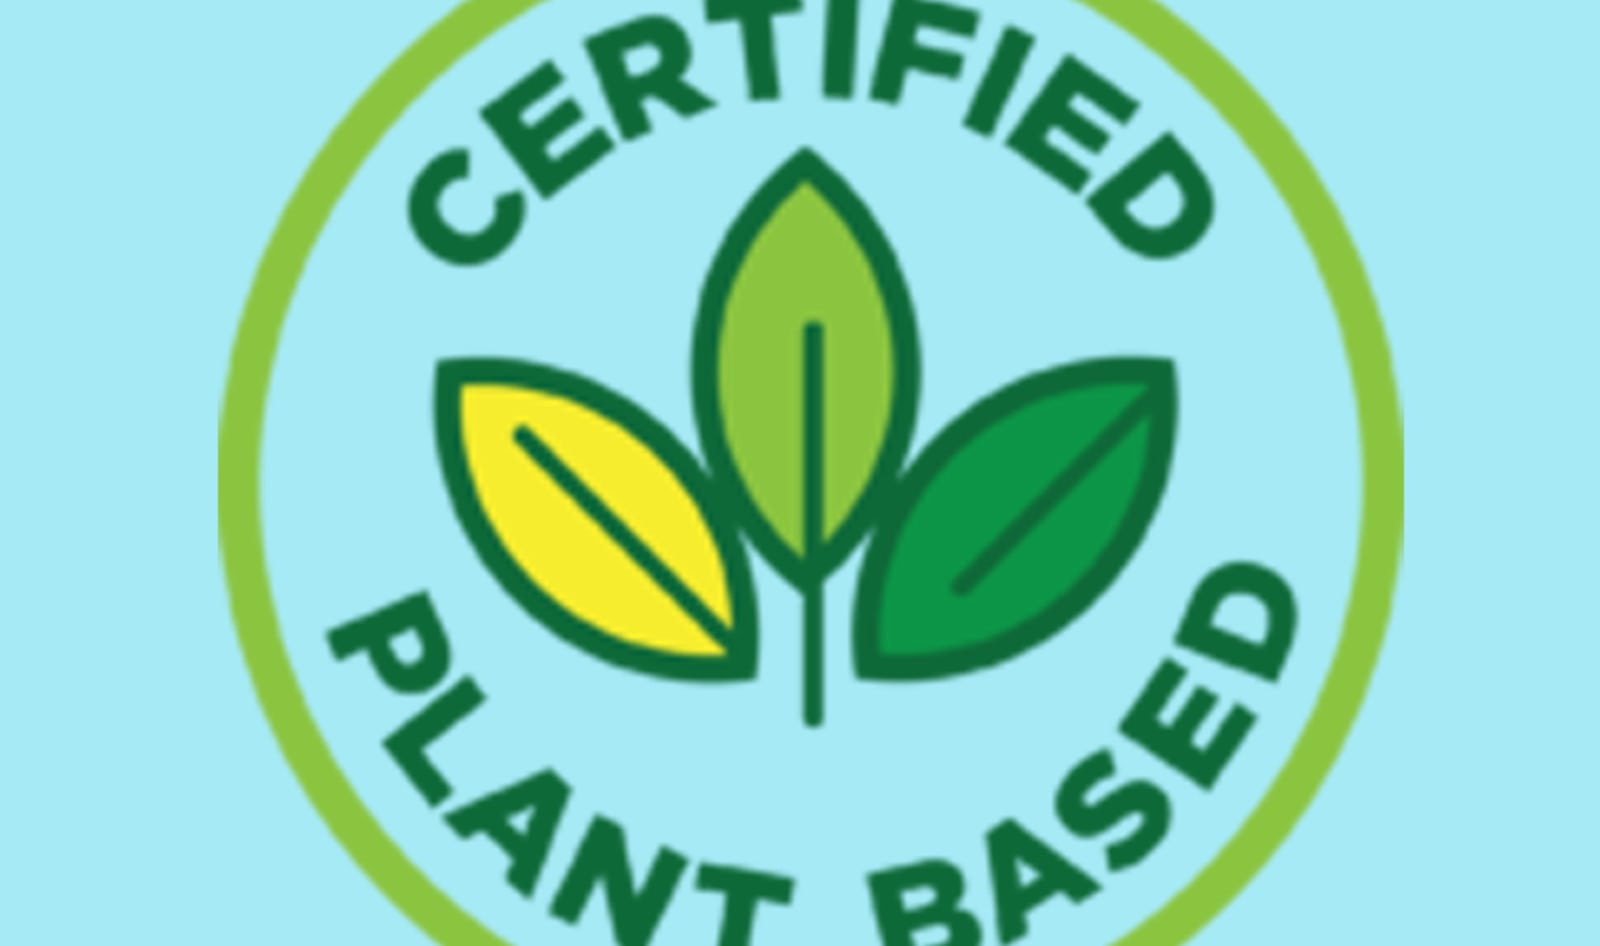 Trade Group Launches Plant-Based Food Certification Program